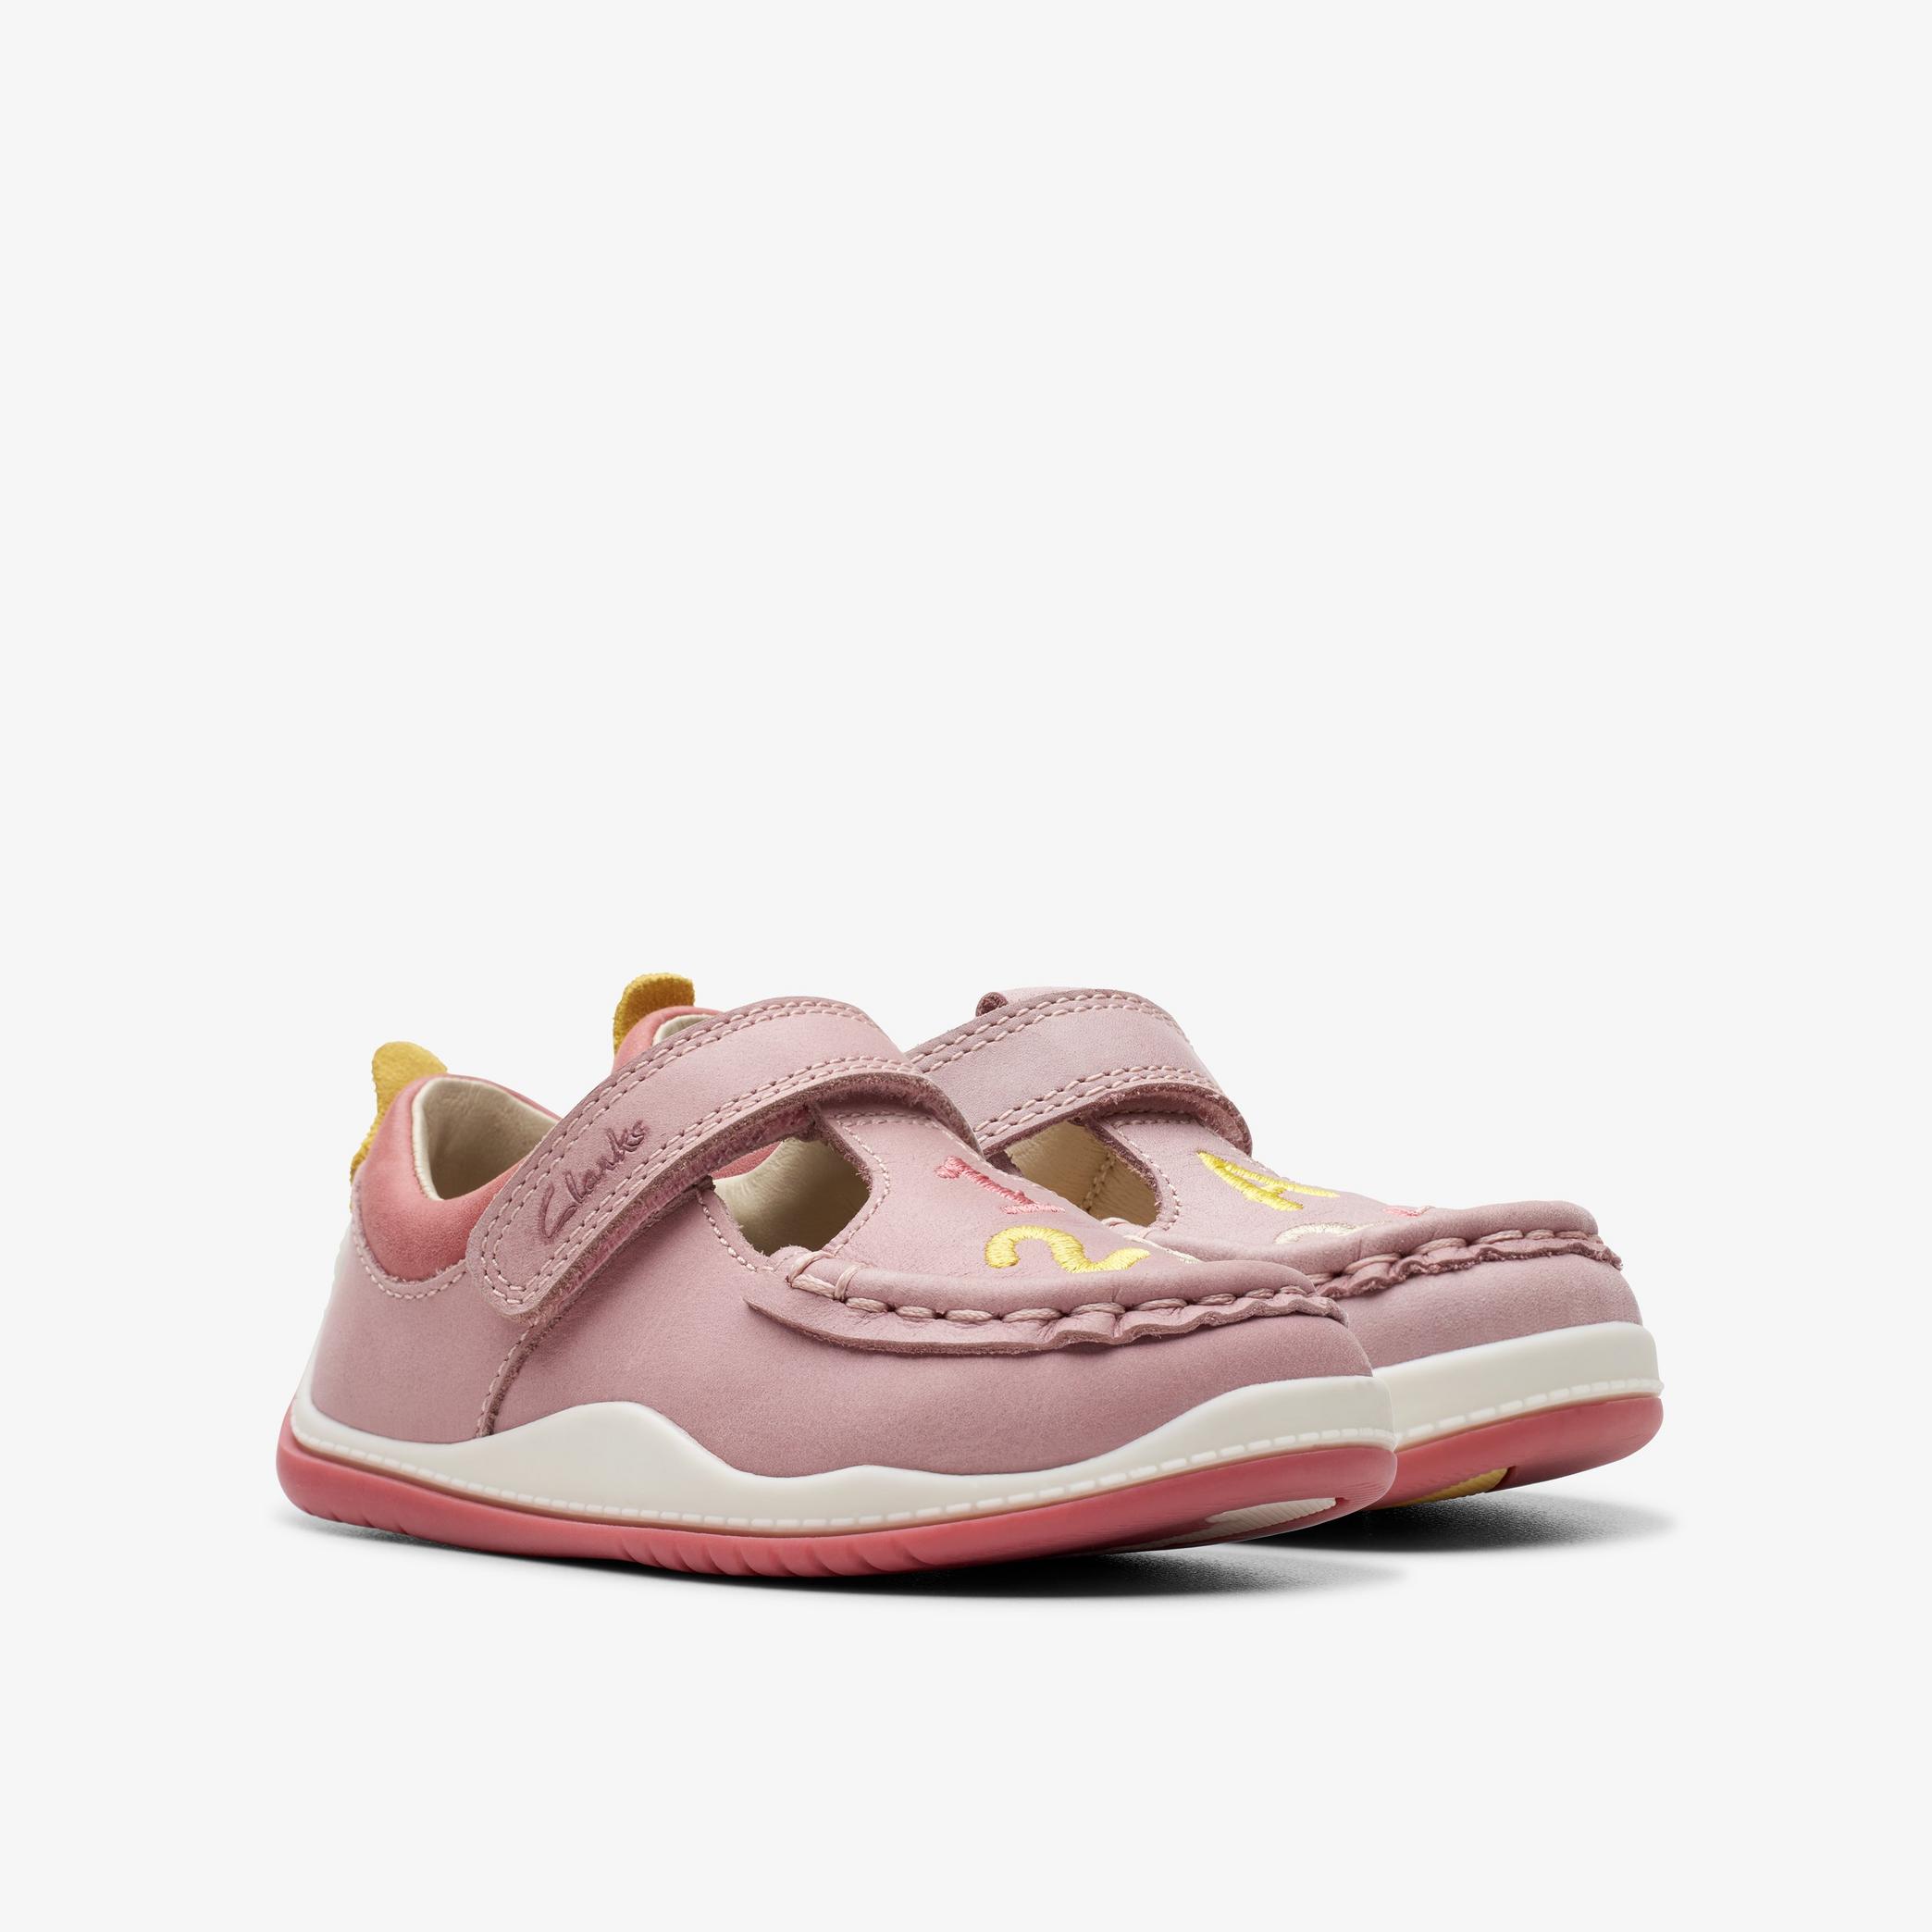 Noodle Shine Toddler Dusty Pink Leather T Bar Shoes, view 7 of 10